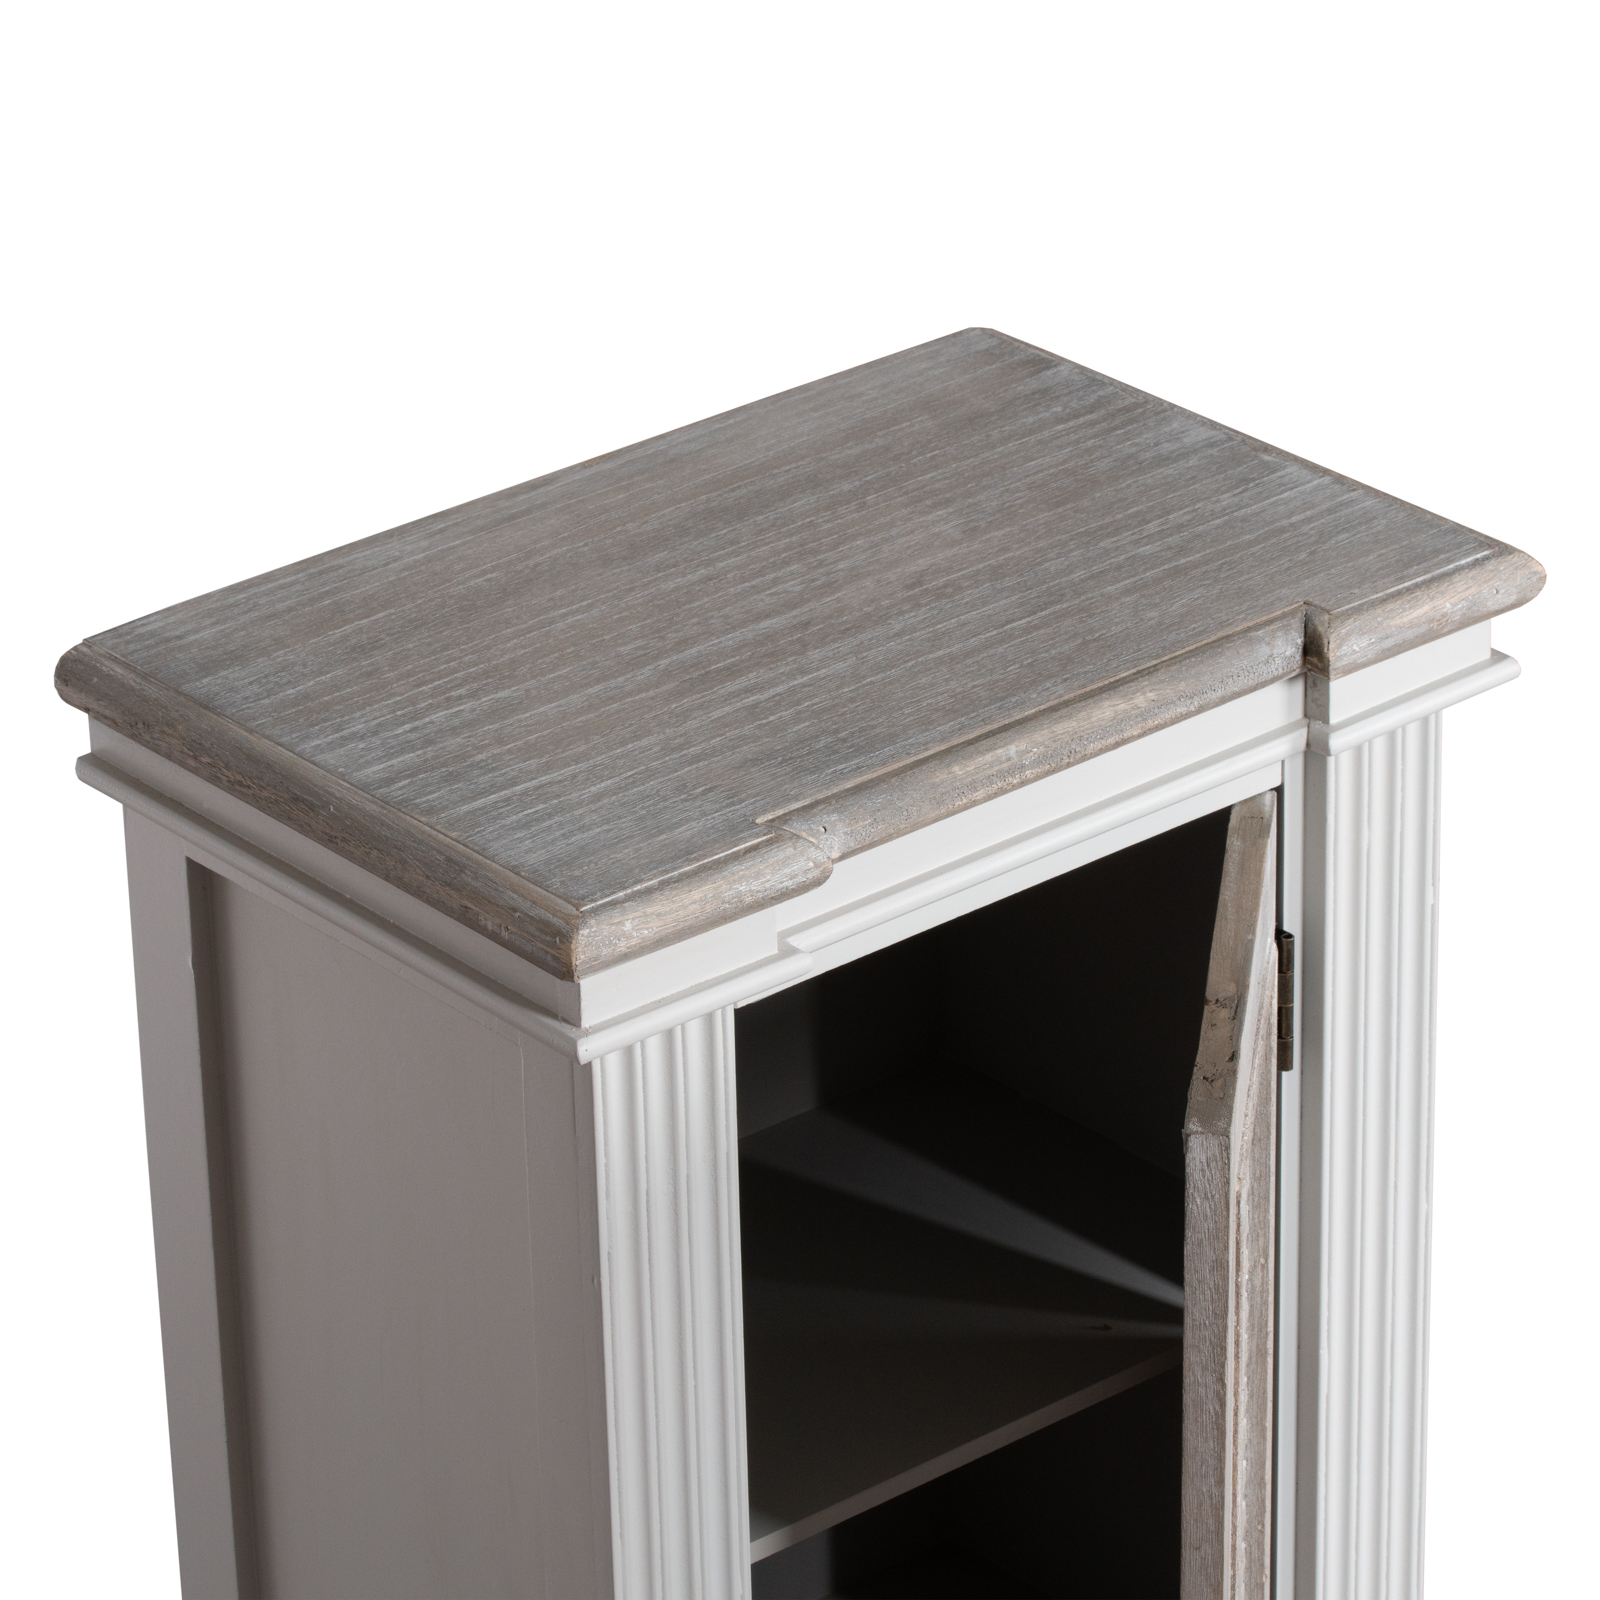 The Liberty Collection Storage Cabinet With Louvered Doors Get